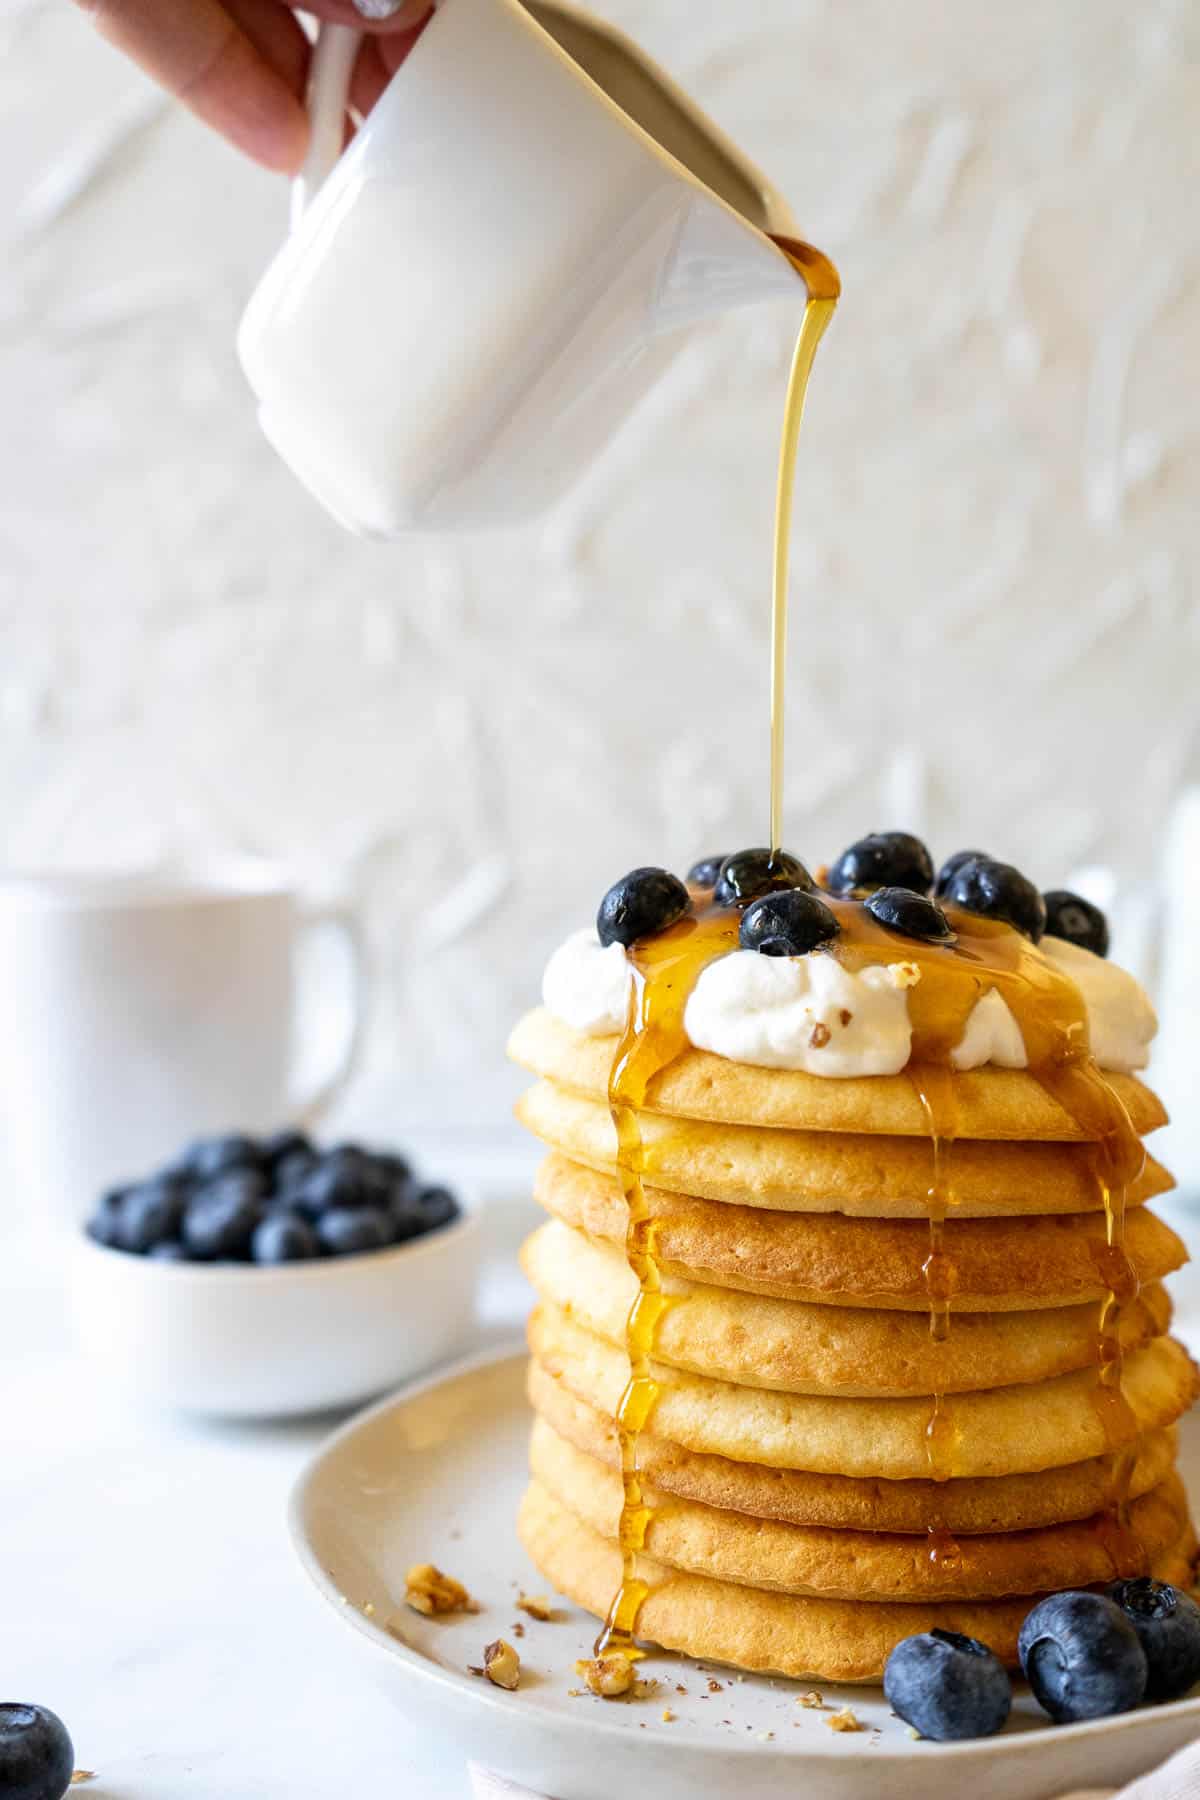 Syrup being poured onto air fryer pancakes that are topped with whipped cream and blueberries.